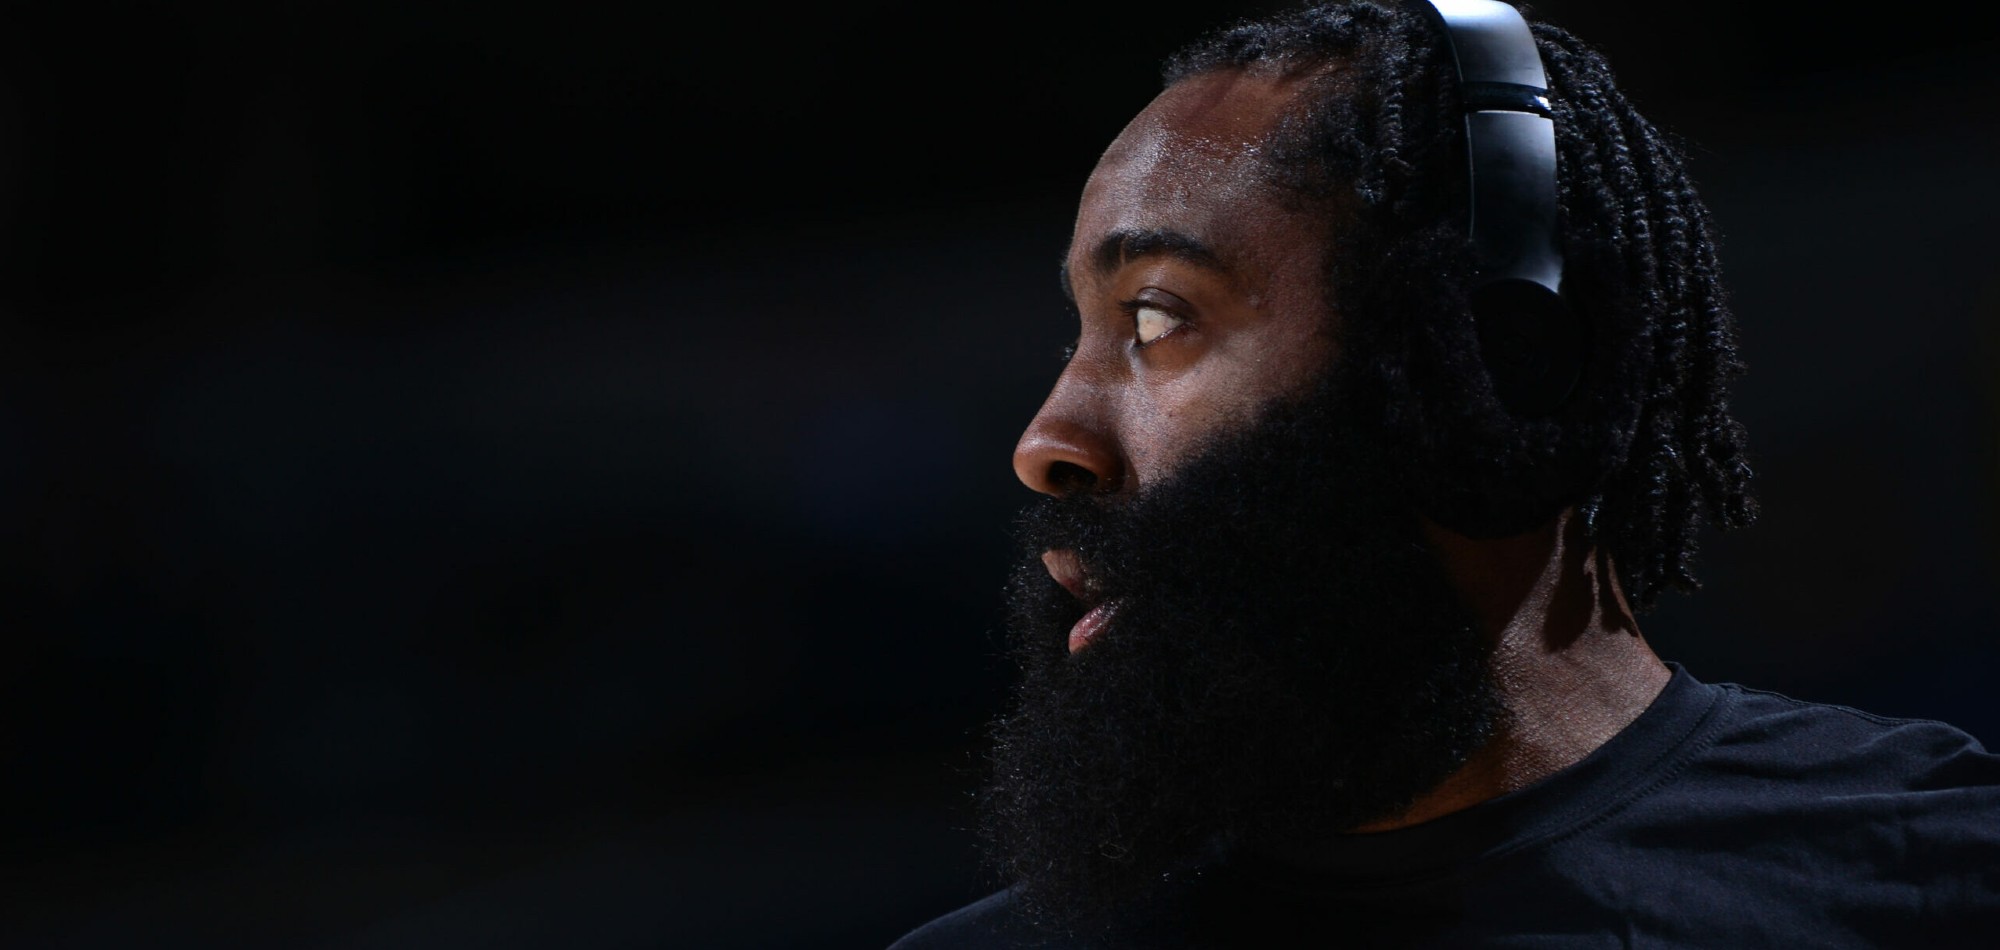 James Harden ready to embrace "unselfish" role alongside new Brooklyn Nets team-mates Kevin Durant and Kyrie Irving